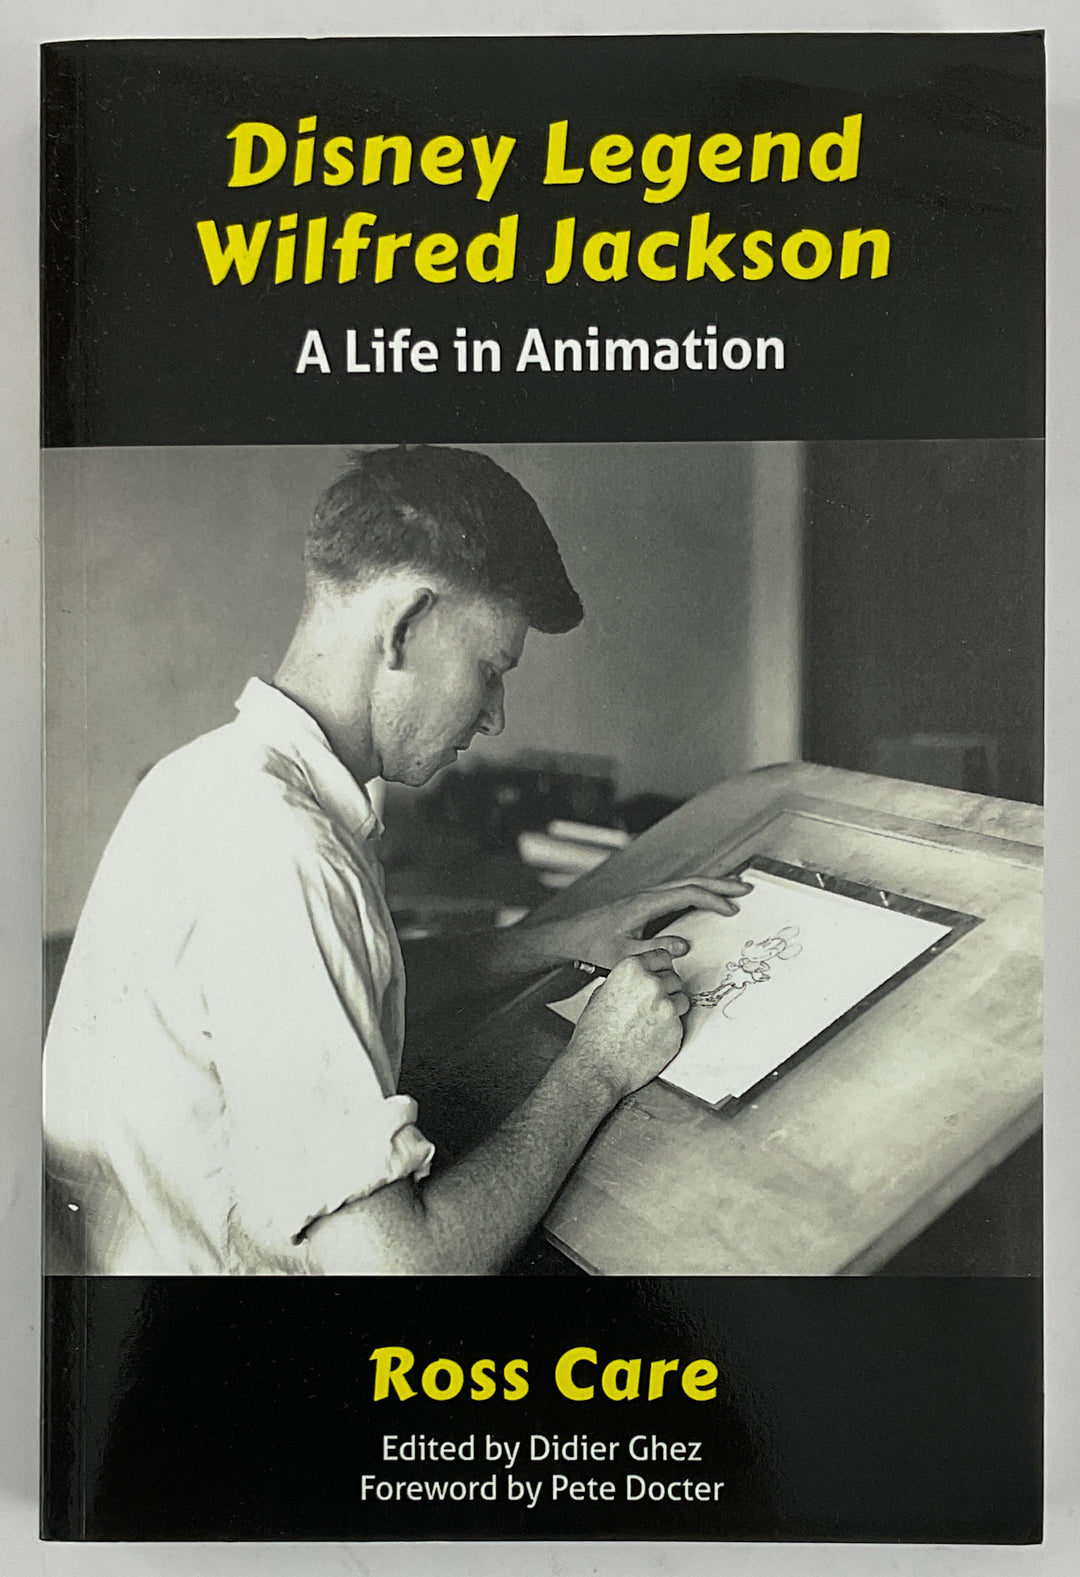 Disney Legend Wilfred Jackson: A Life in Animation